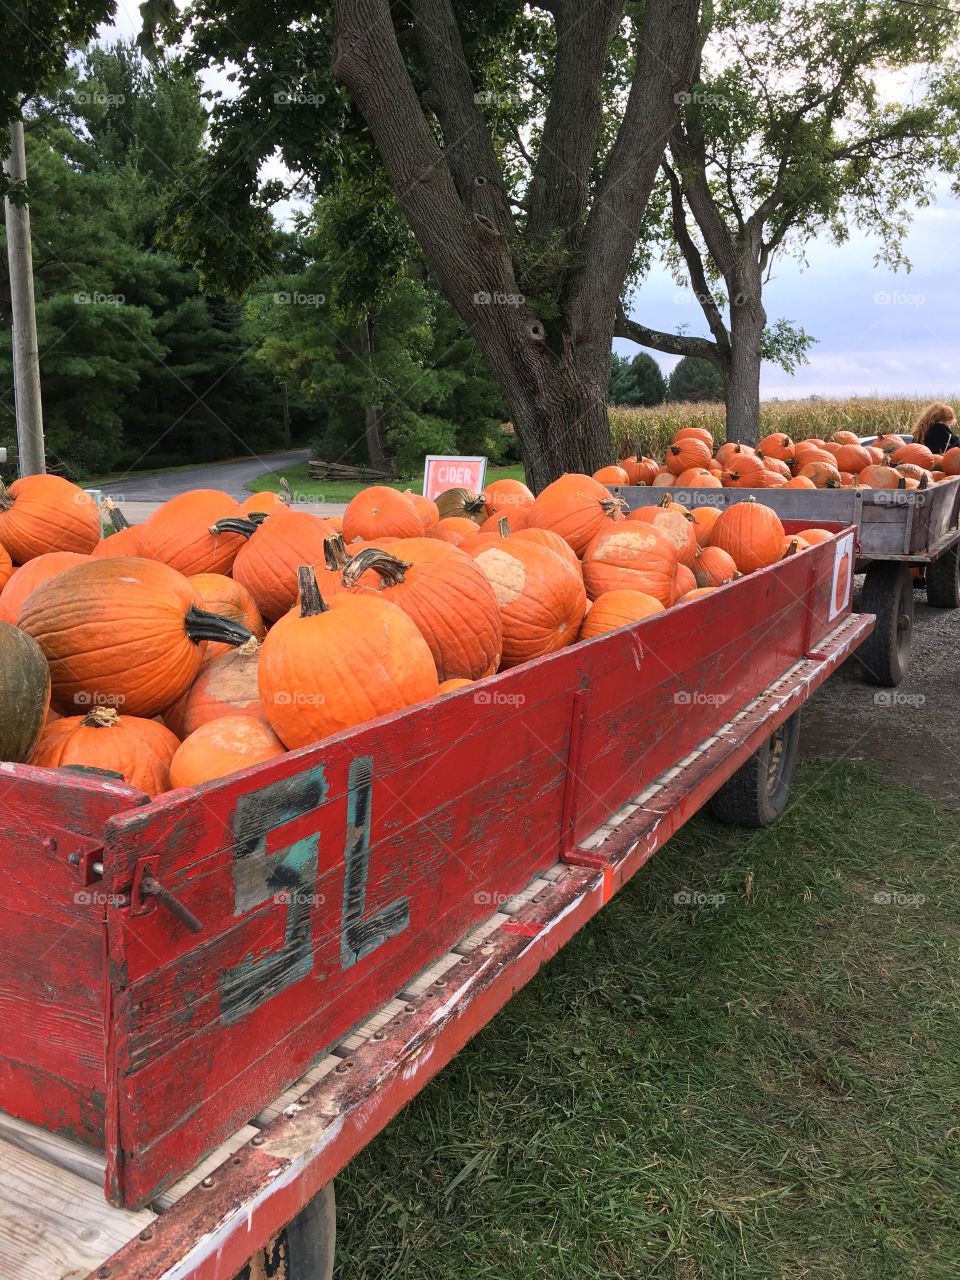 Pumpkins in a wagon in Ohio. Fall is here!